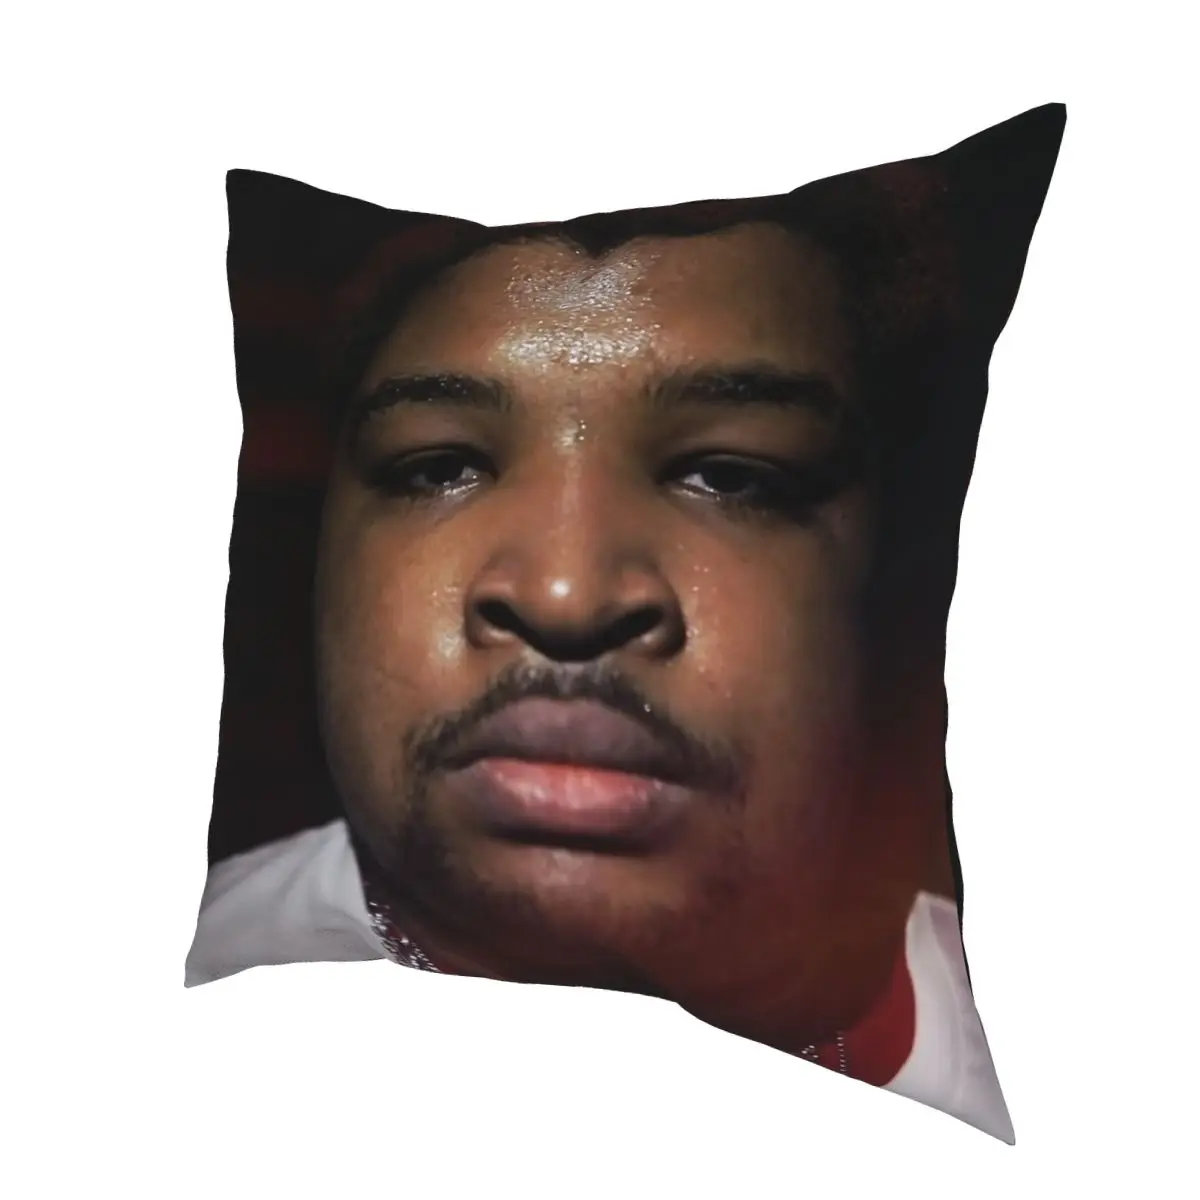 Mario Judah but fatter Throw Pillow for Sale by memetees5346